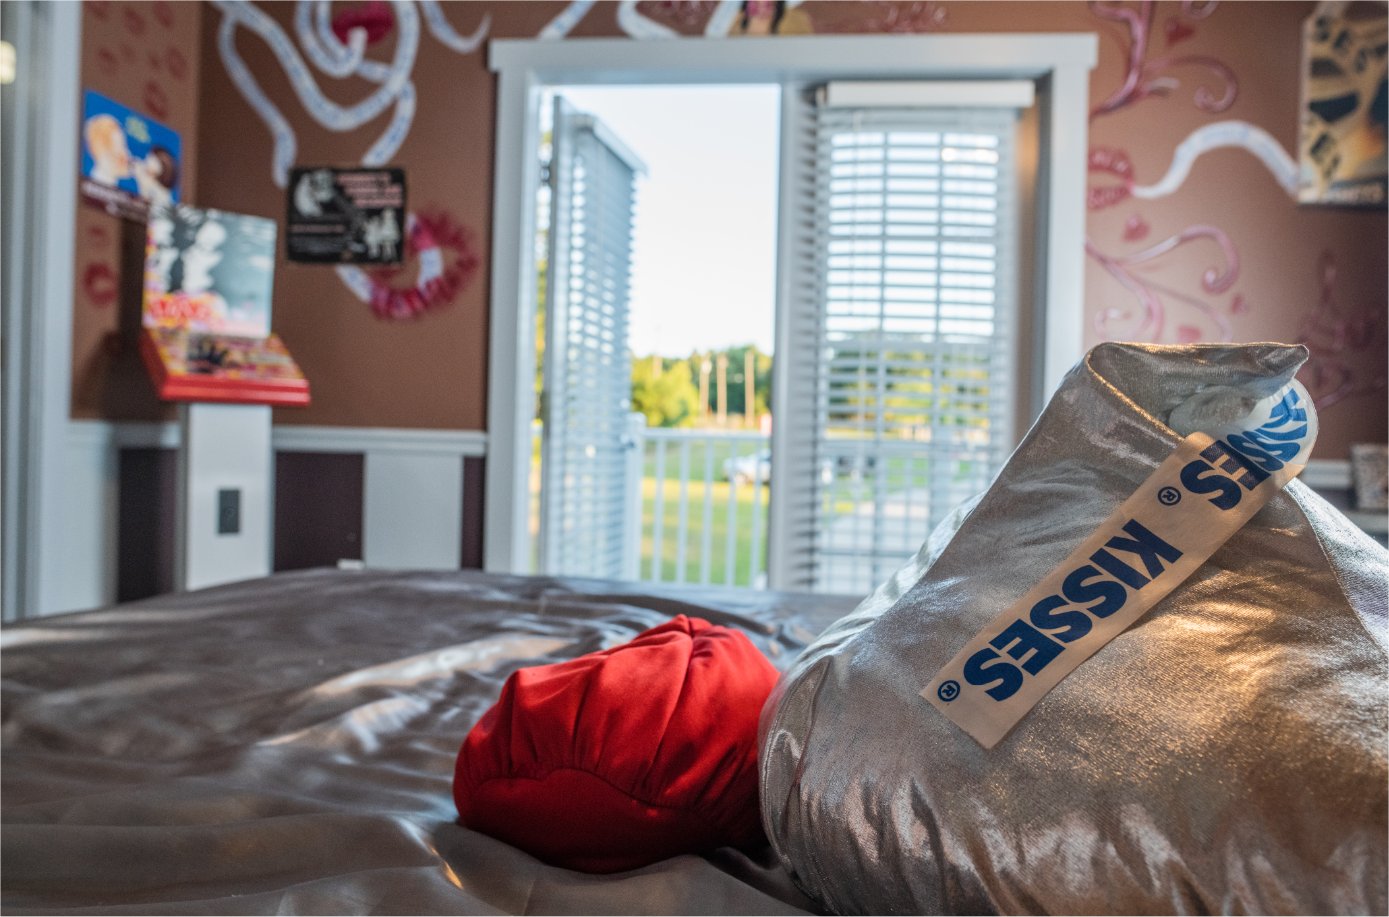 Rent The Sweet Escape airbnb VRBO vacation home near Orlando, Florida and enjoy the Hershey Kisses themed bedroom!